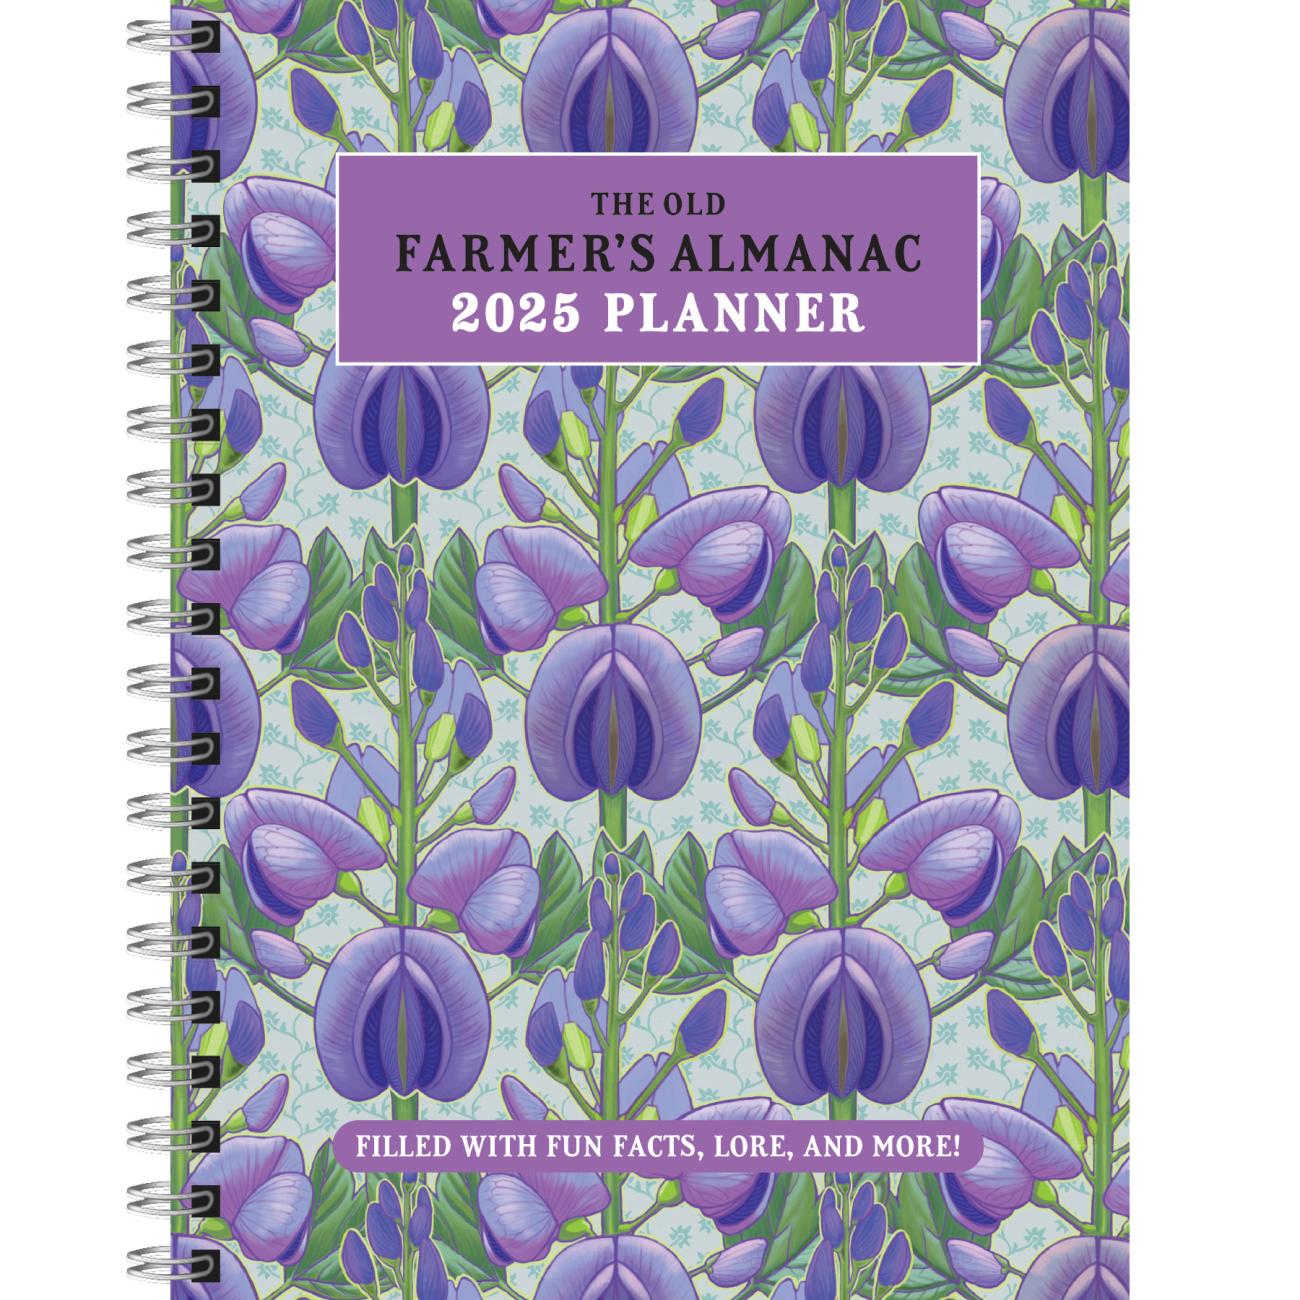 2025 OFA Planner Cover